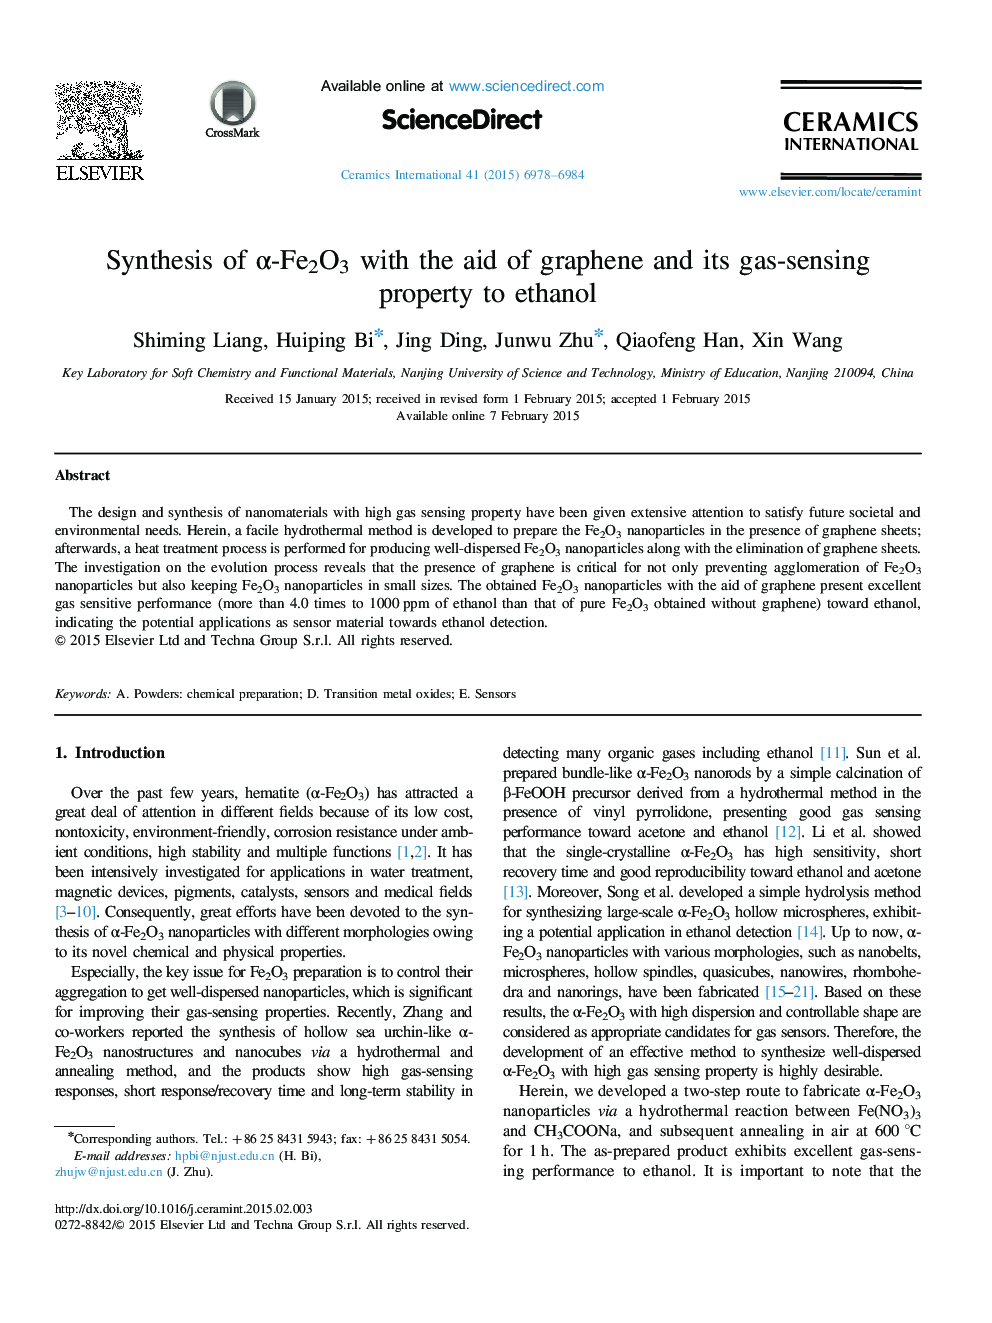 Synthesis of α-Fe2O3 with the aid of graphene and its gas-sensing property to ethanol